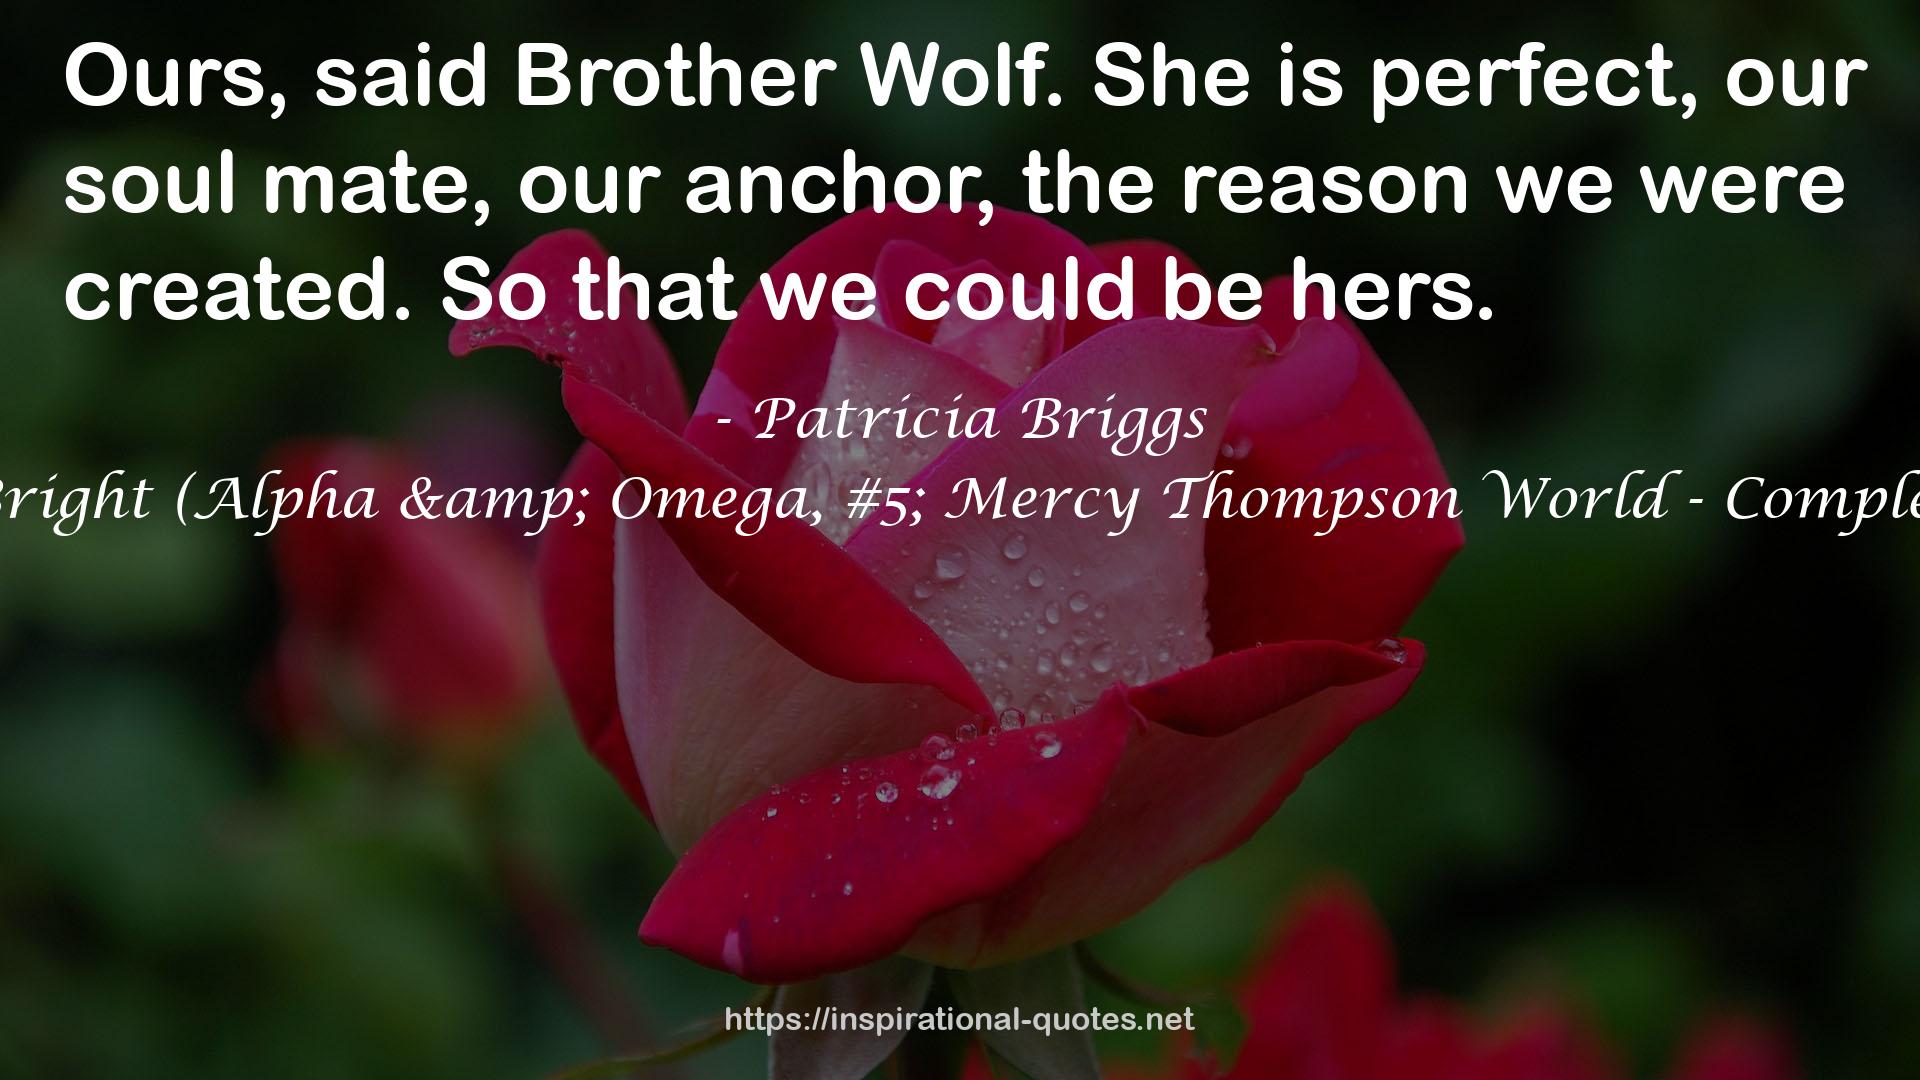 Burn Bright (Alpha & Omega, #5; Mercy Thompson World - Complete, #15) QUOTES